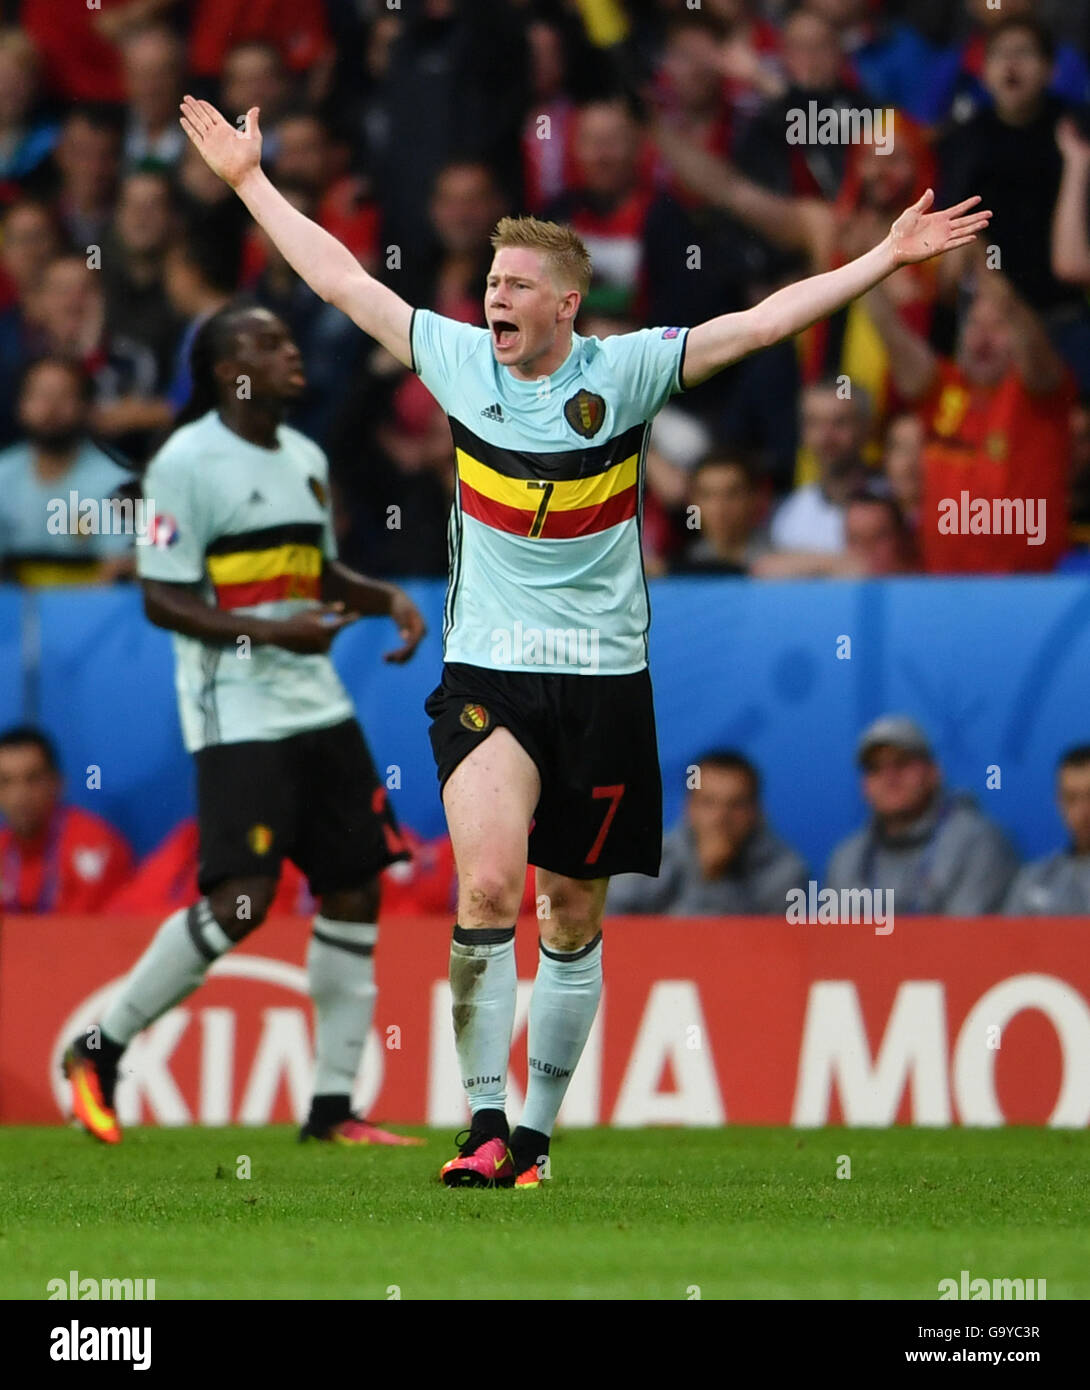 Lille, France. 1st July, 2016. Kevin De Bruyne of Belgium reacts during the Euro 2016 quarterfinal match between Belgium and Wales in Lille, France, July 1, 2016. Credit:  Tao Xiyi/Xinhua/Alamy Live News Stock Photo